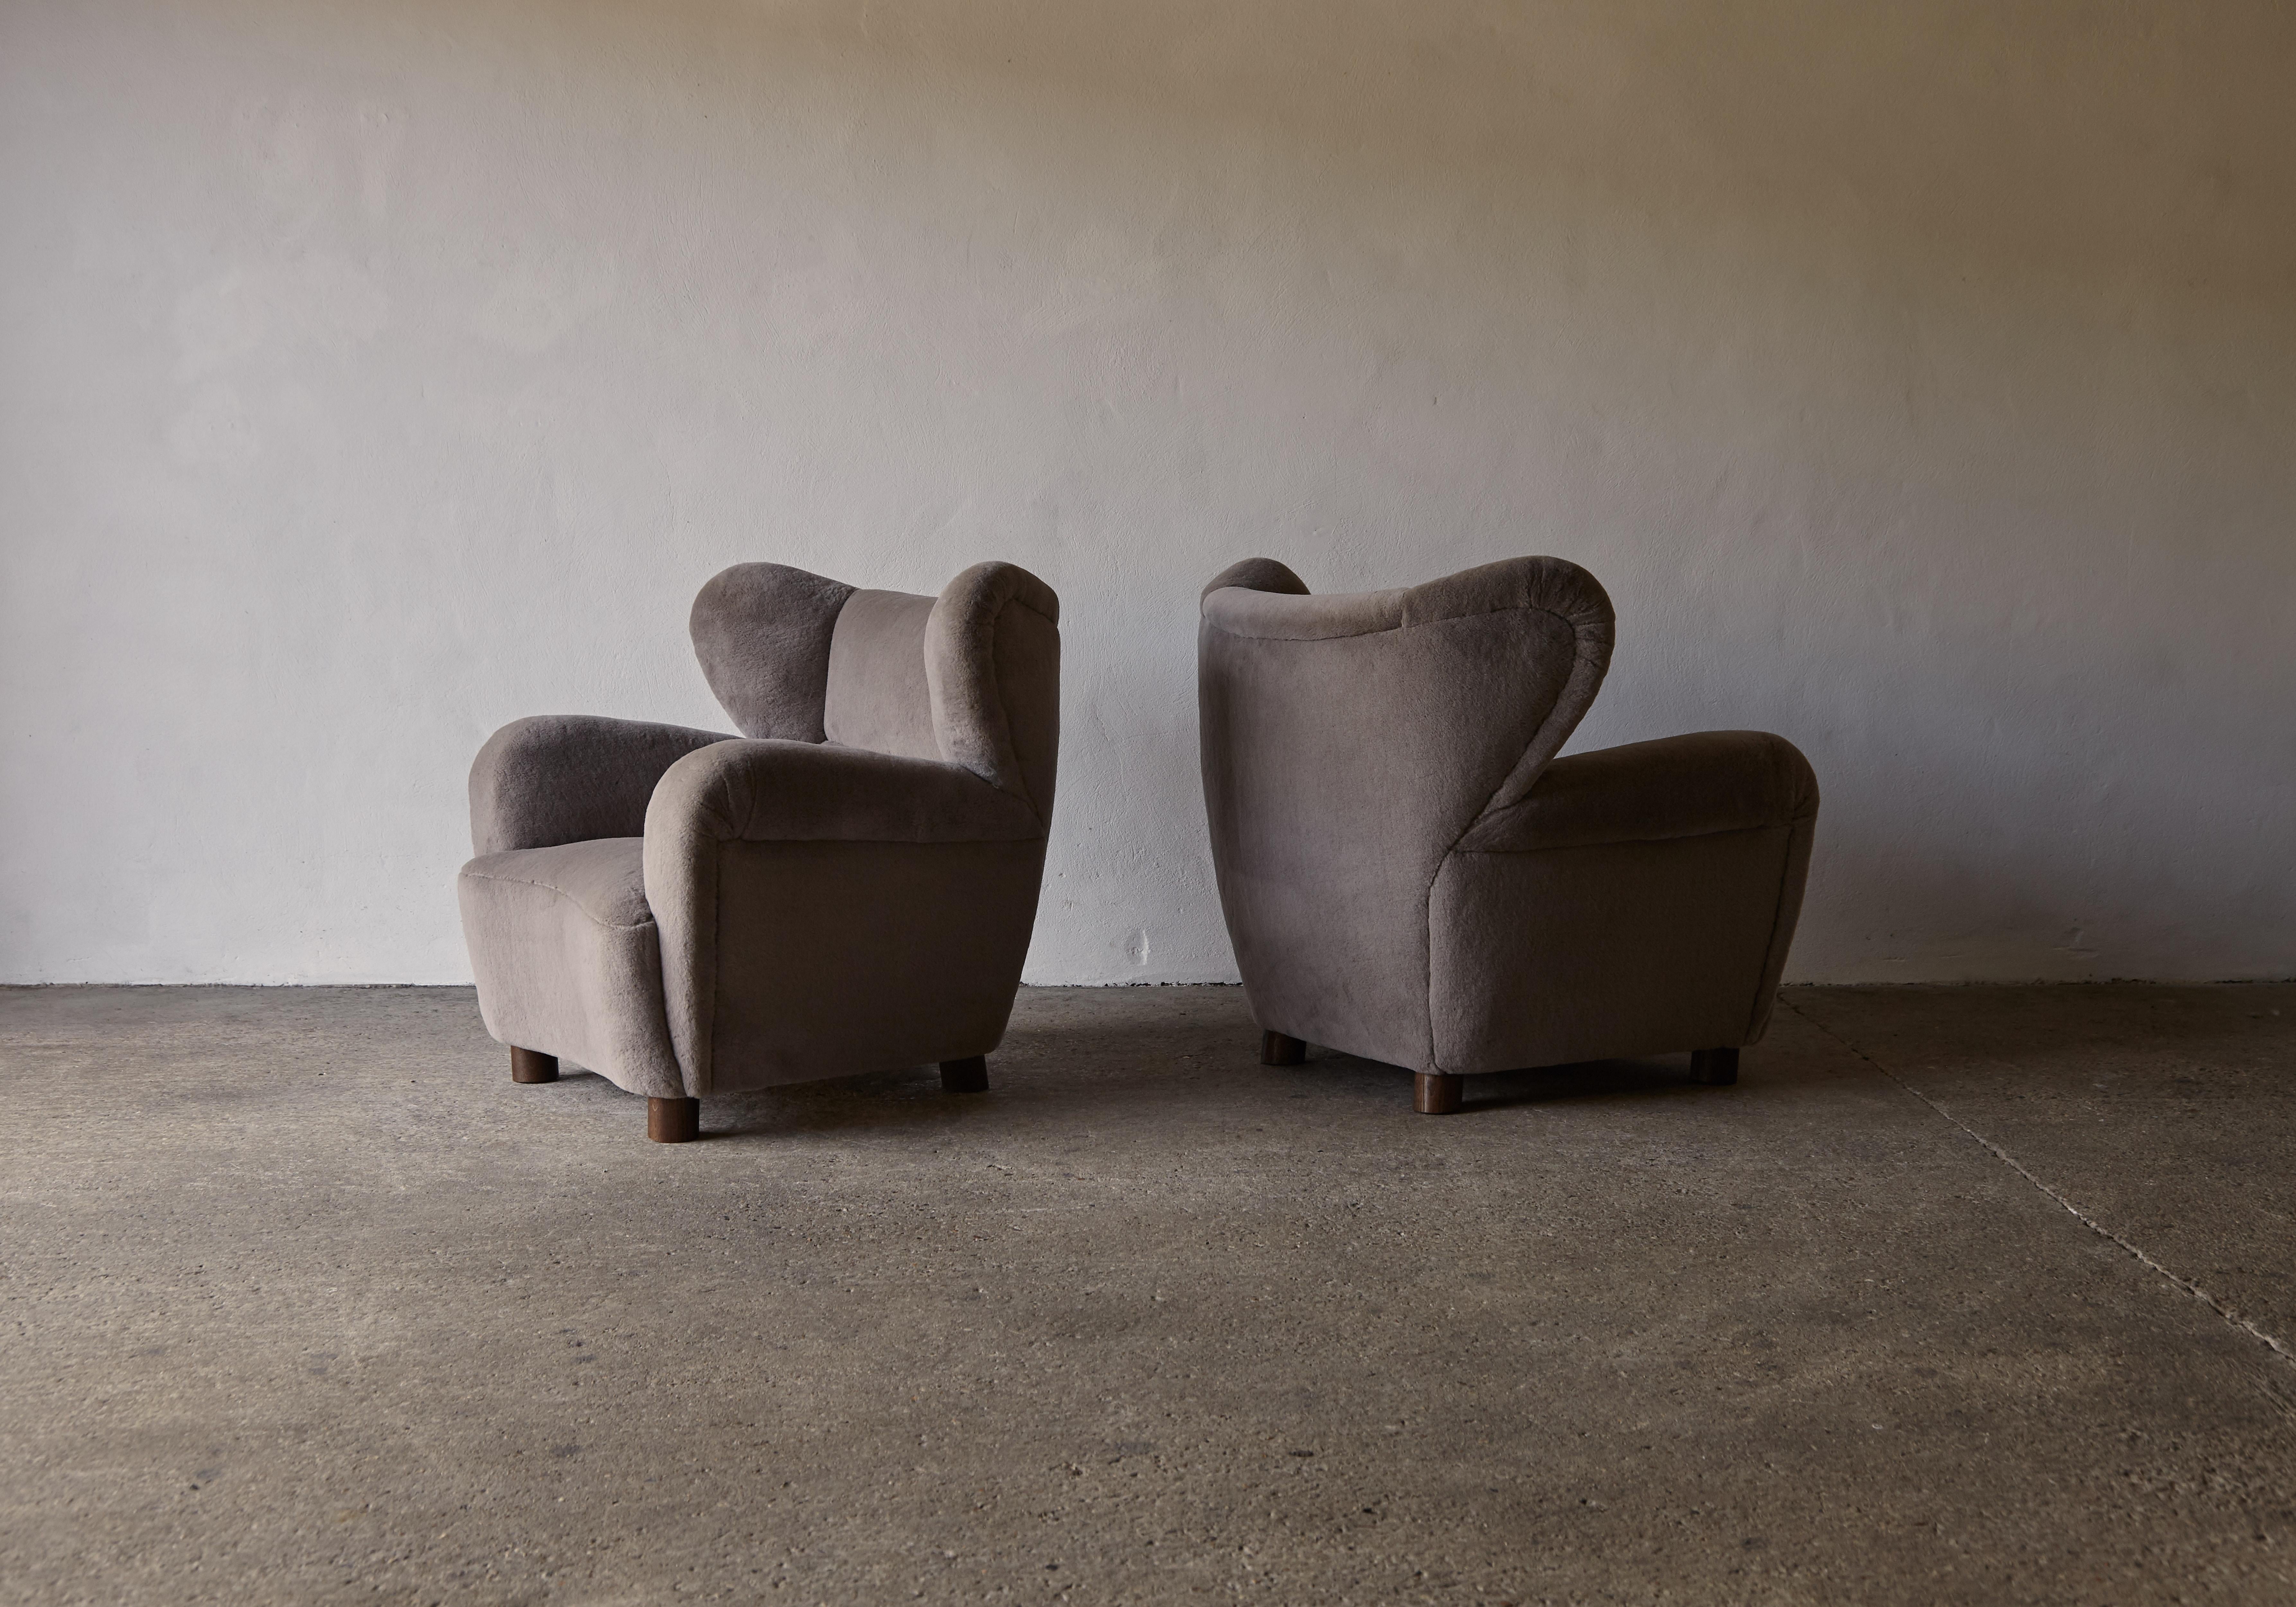 Superb Pair of Armchairs, Newly Upholstered in Pure Alpaca, Denmark, 1940s / 50s 6